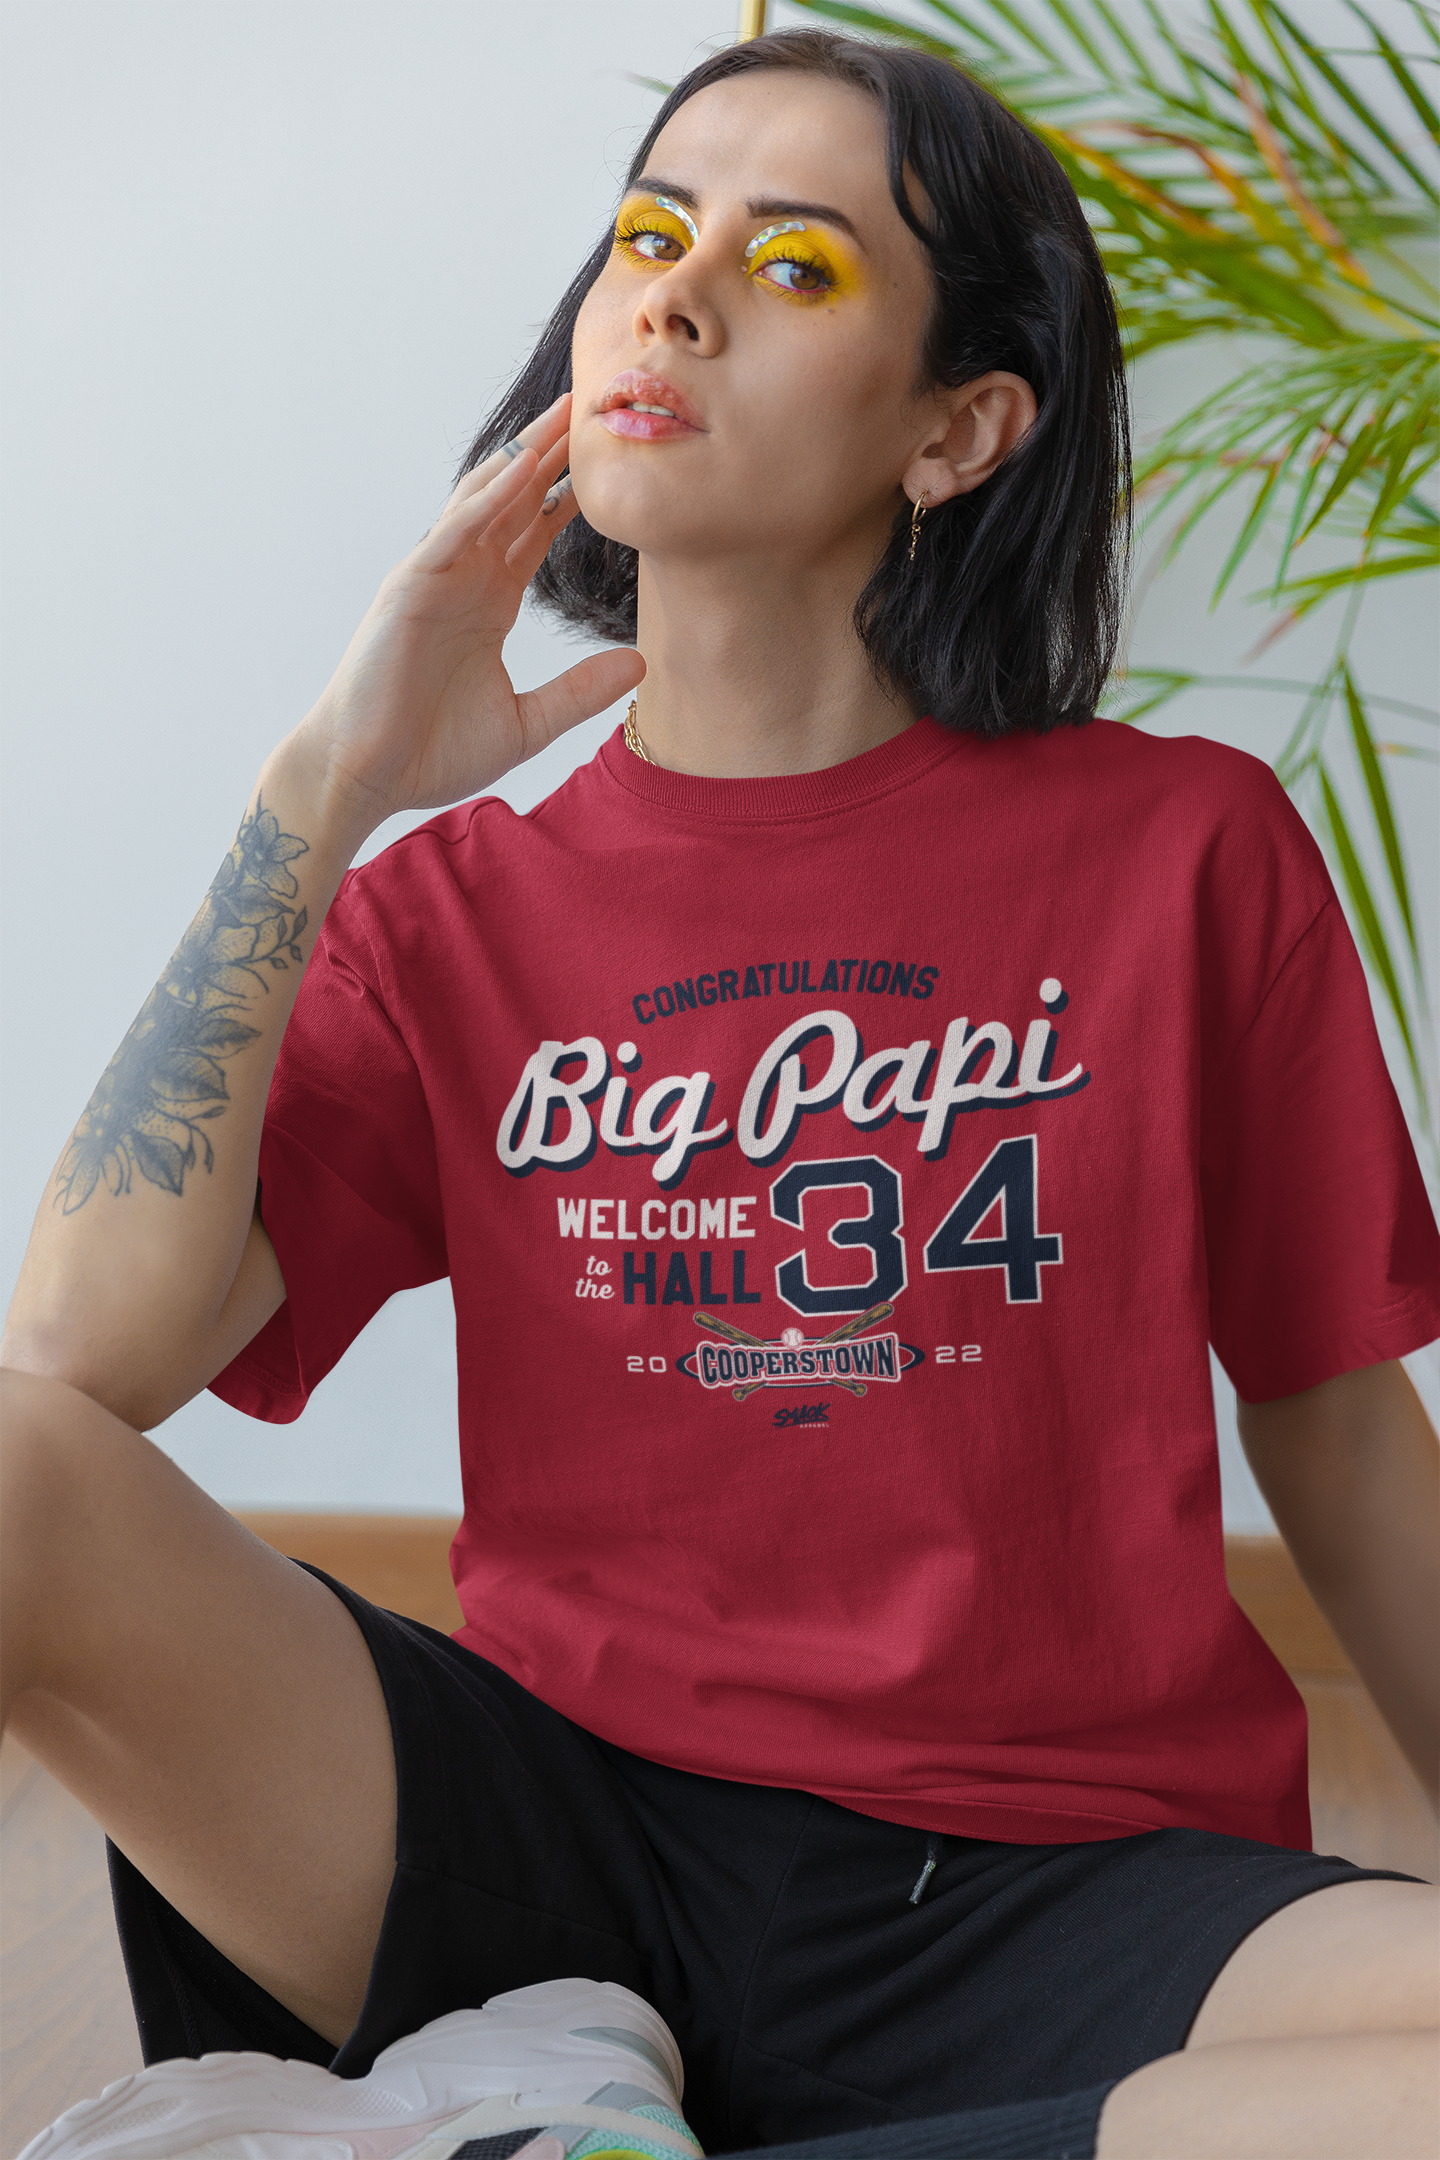 Smack Apparel Congratulations Big Papi Welcome to The Hall for Boston Baseball Fans, Long Sleeve / 2XL / Red